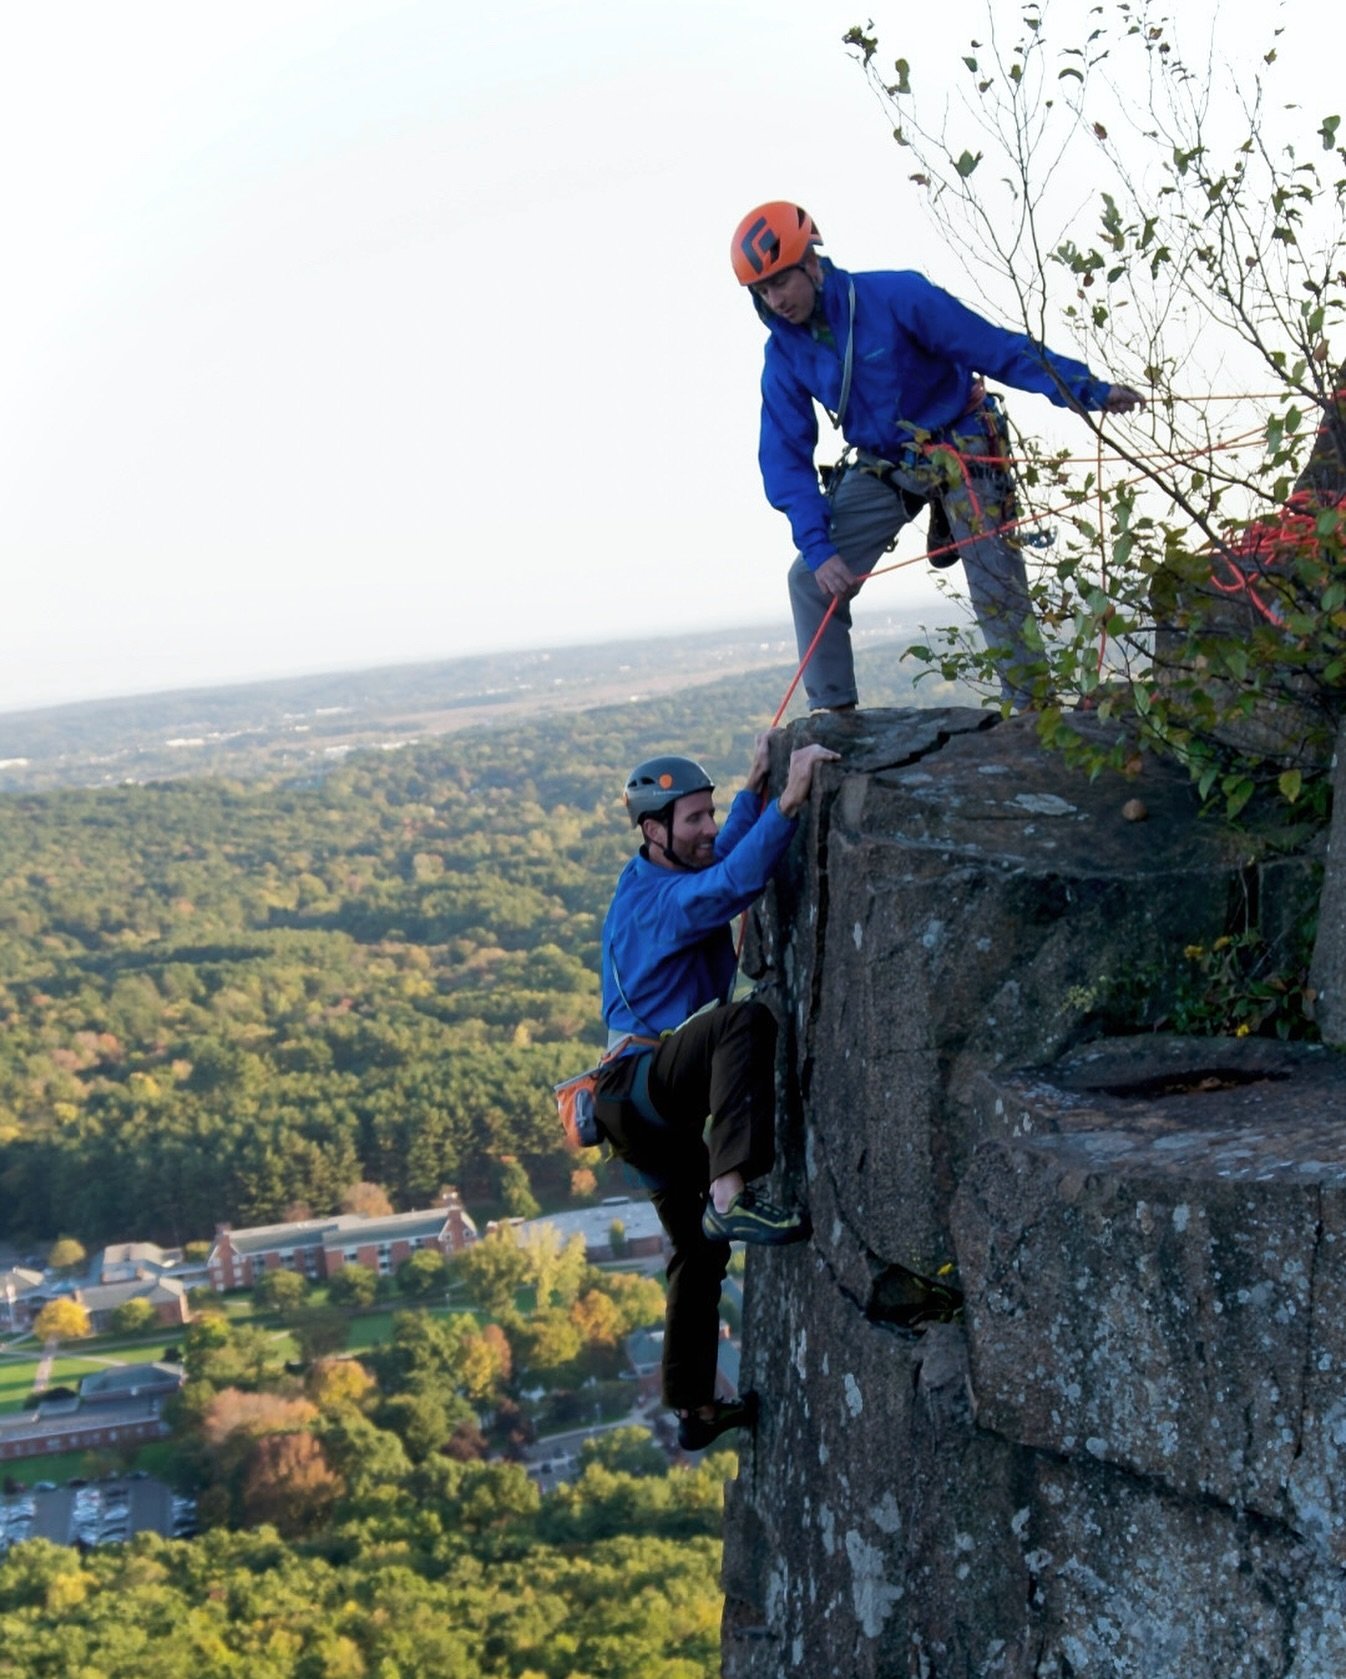 Whats good?! It&rsquo;s been a minute or two since you&rsquo;ve heard from us! 

A little reintroduction- we are Ascent Climbing. Guiding and instructing Connecticut rock and ice since 2007

We offer a variety of climbing courses and experiences. Is 